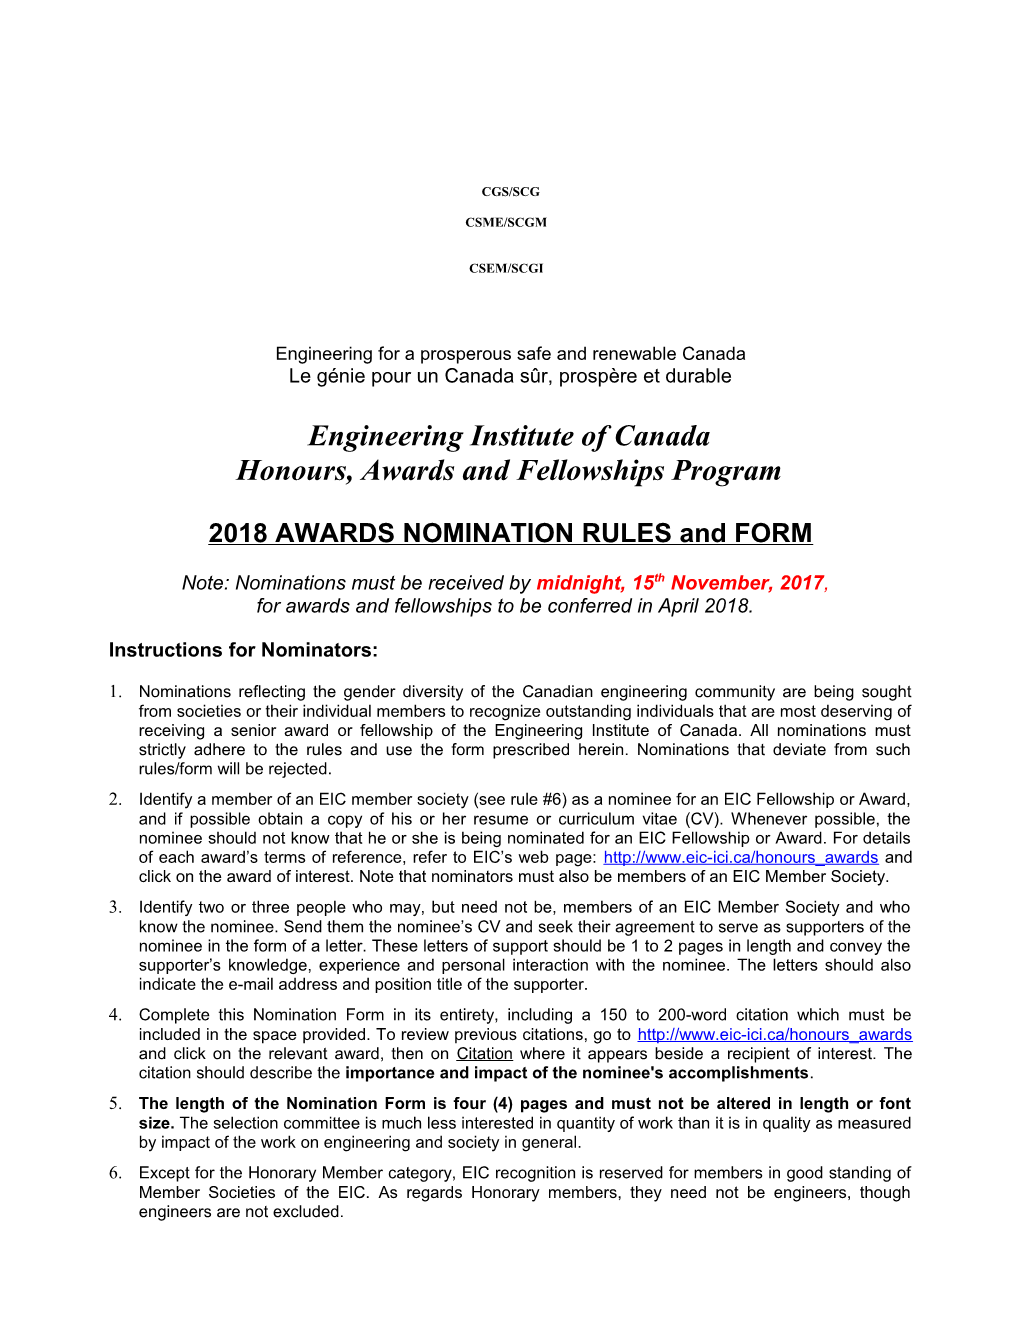 EIC Awards Nomination Rules and Form